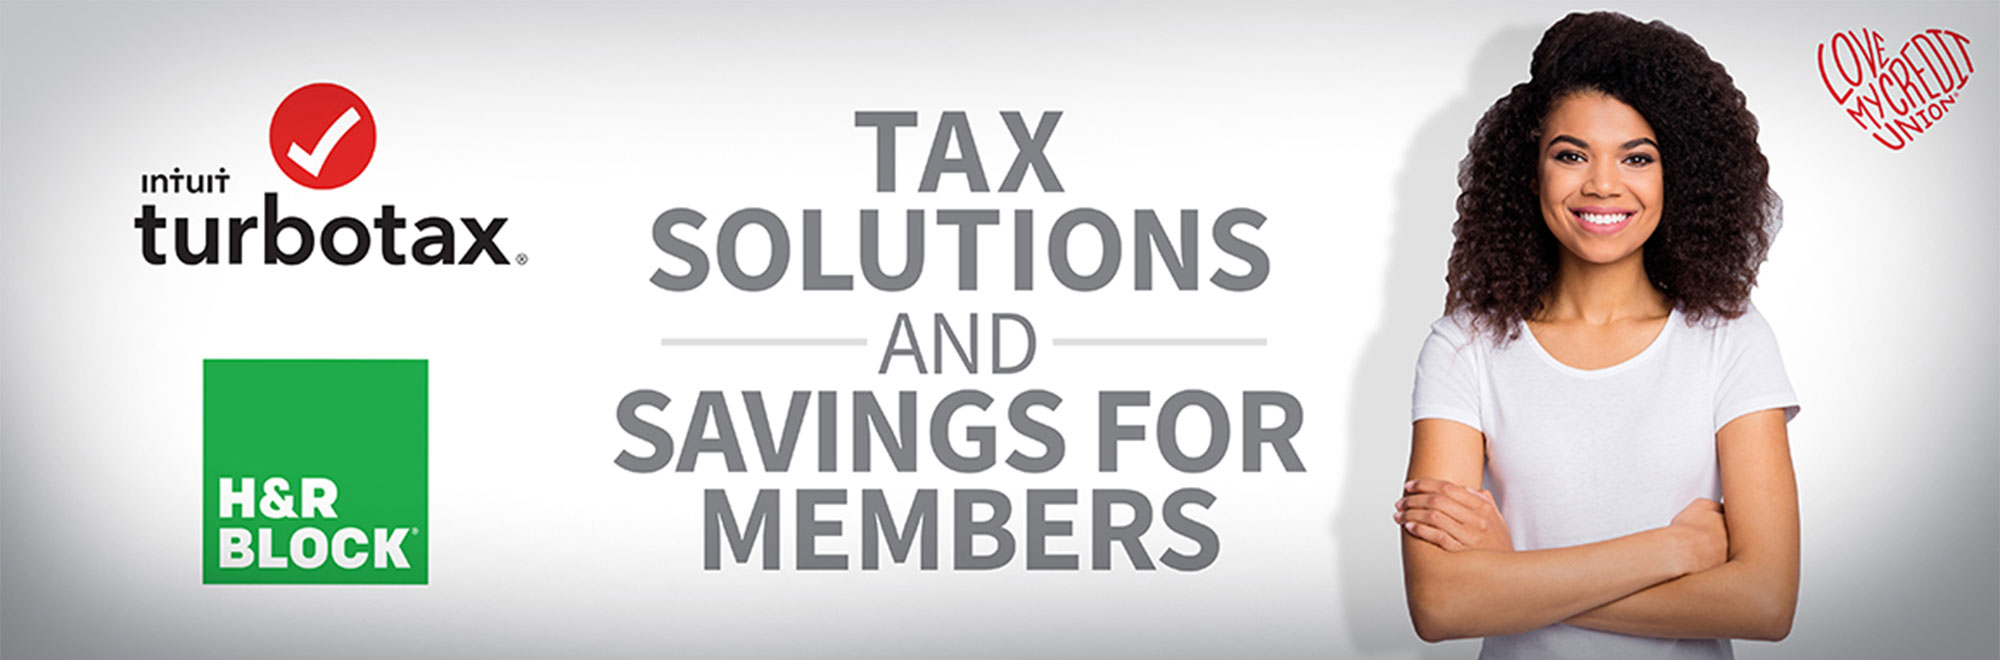 Tax Savings and Solutions for Members with Turbo Tax and H&R Block through Love My Credit Union